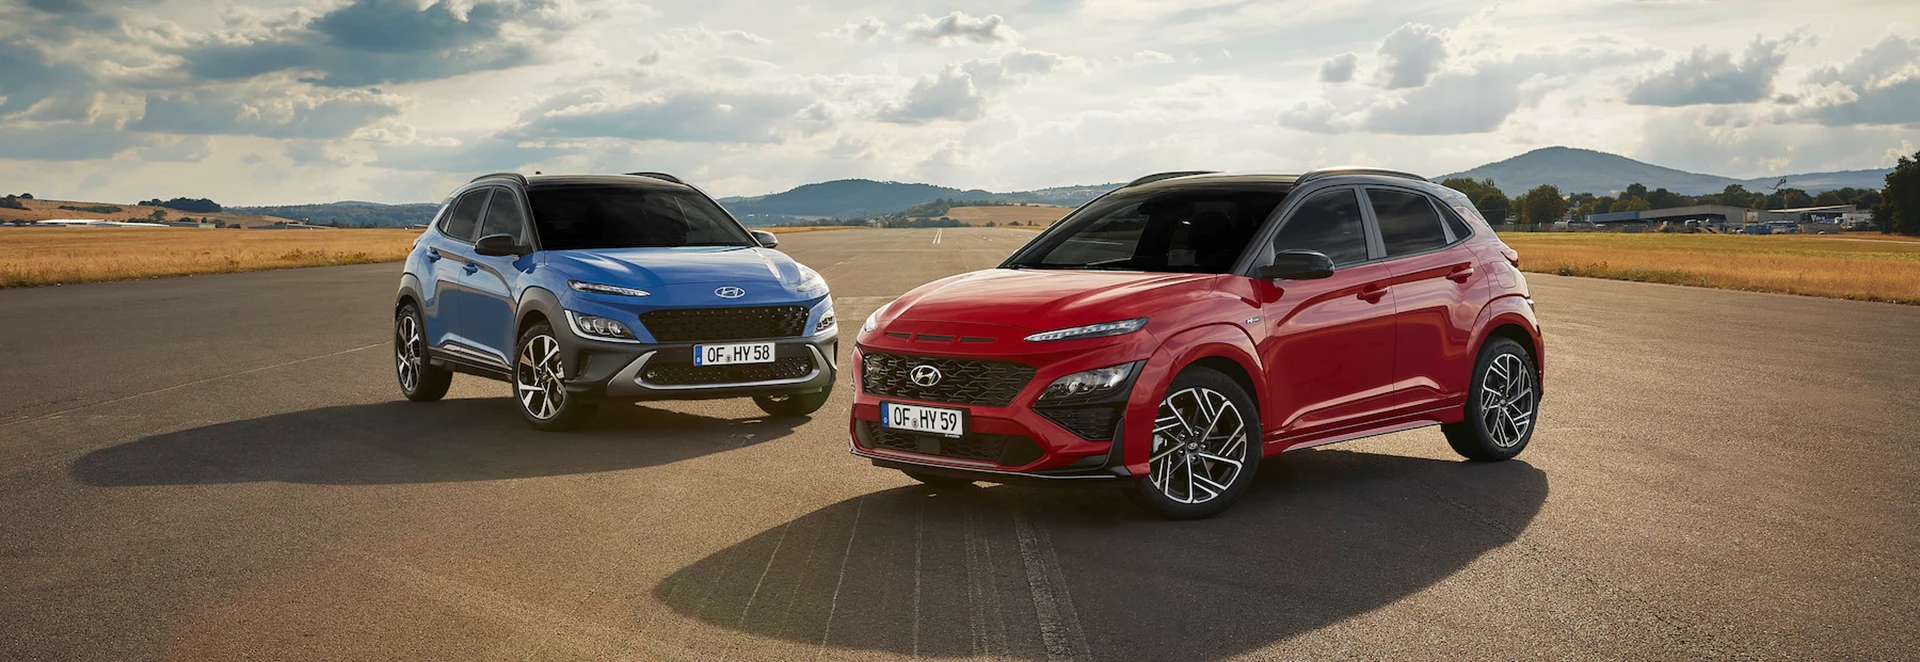 Hyundai announces prices and specs for updated Kona crossover 